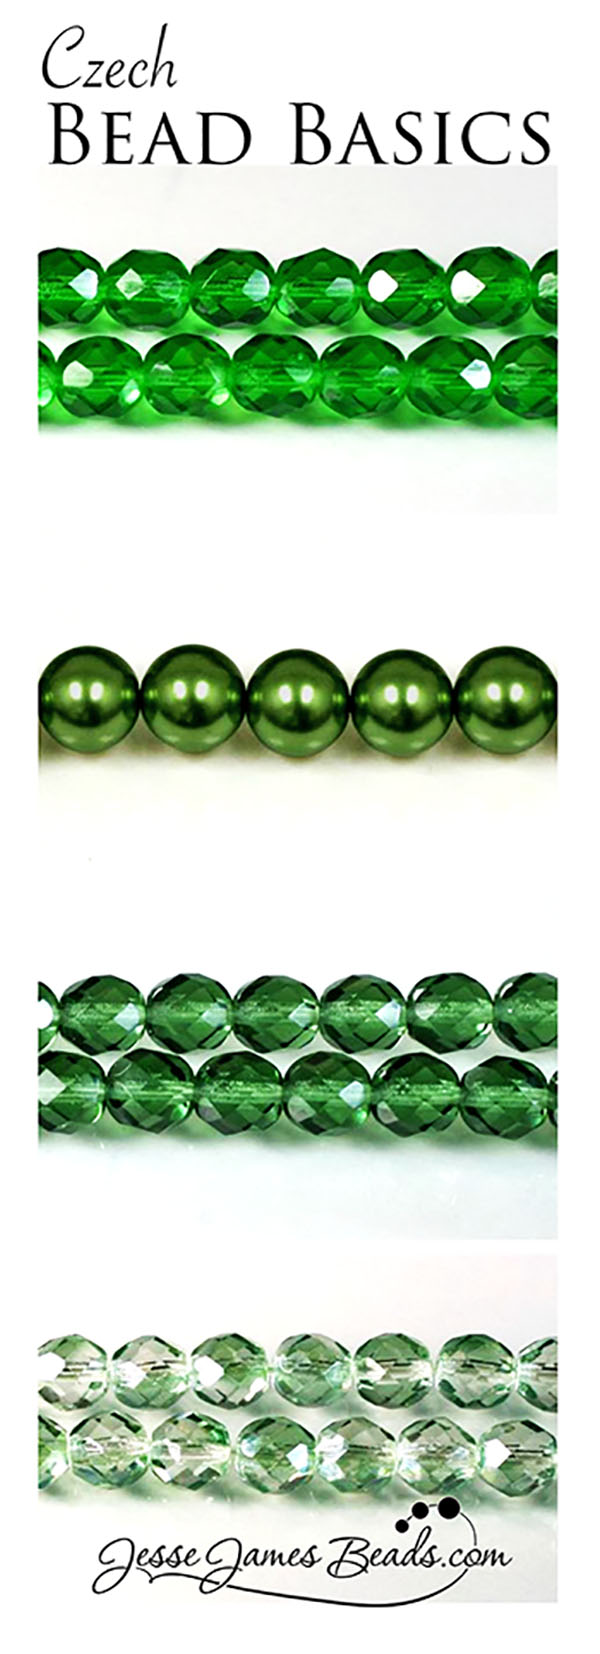 Czech green beads for Jewelry Making - Basic Beading Supplies from Jesse James Beads